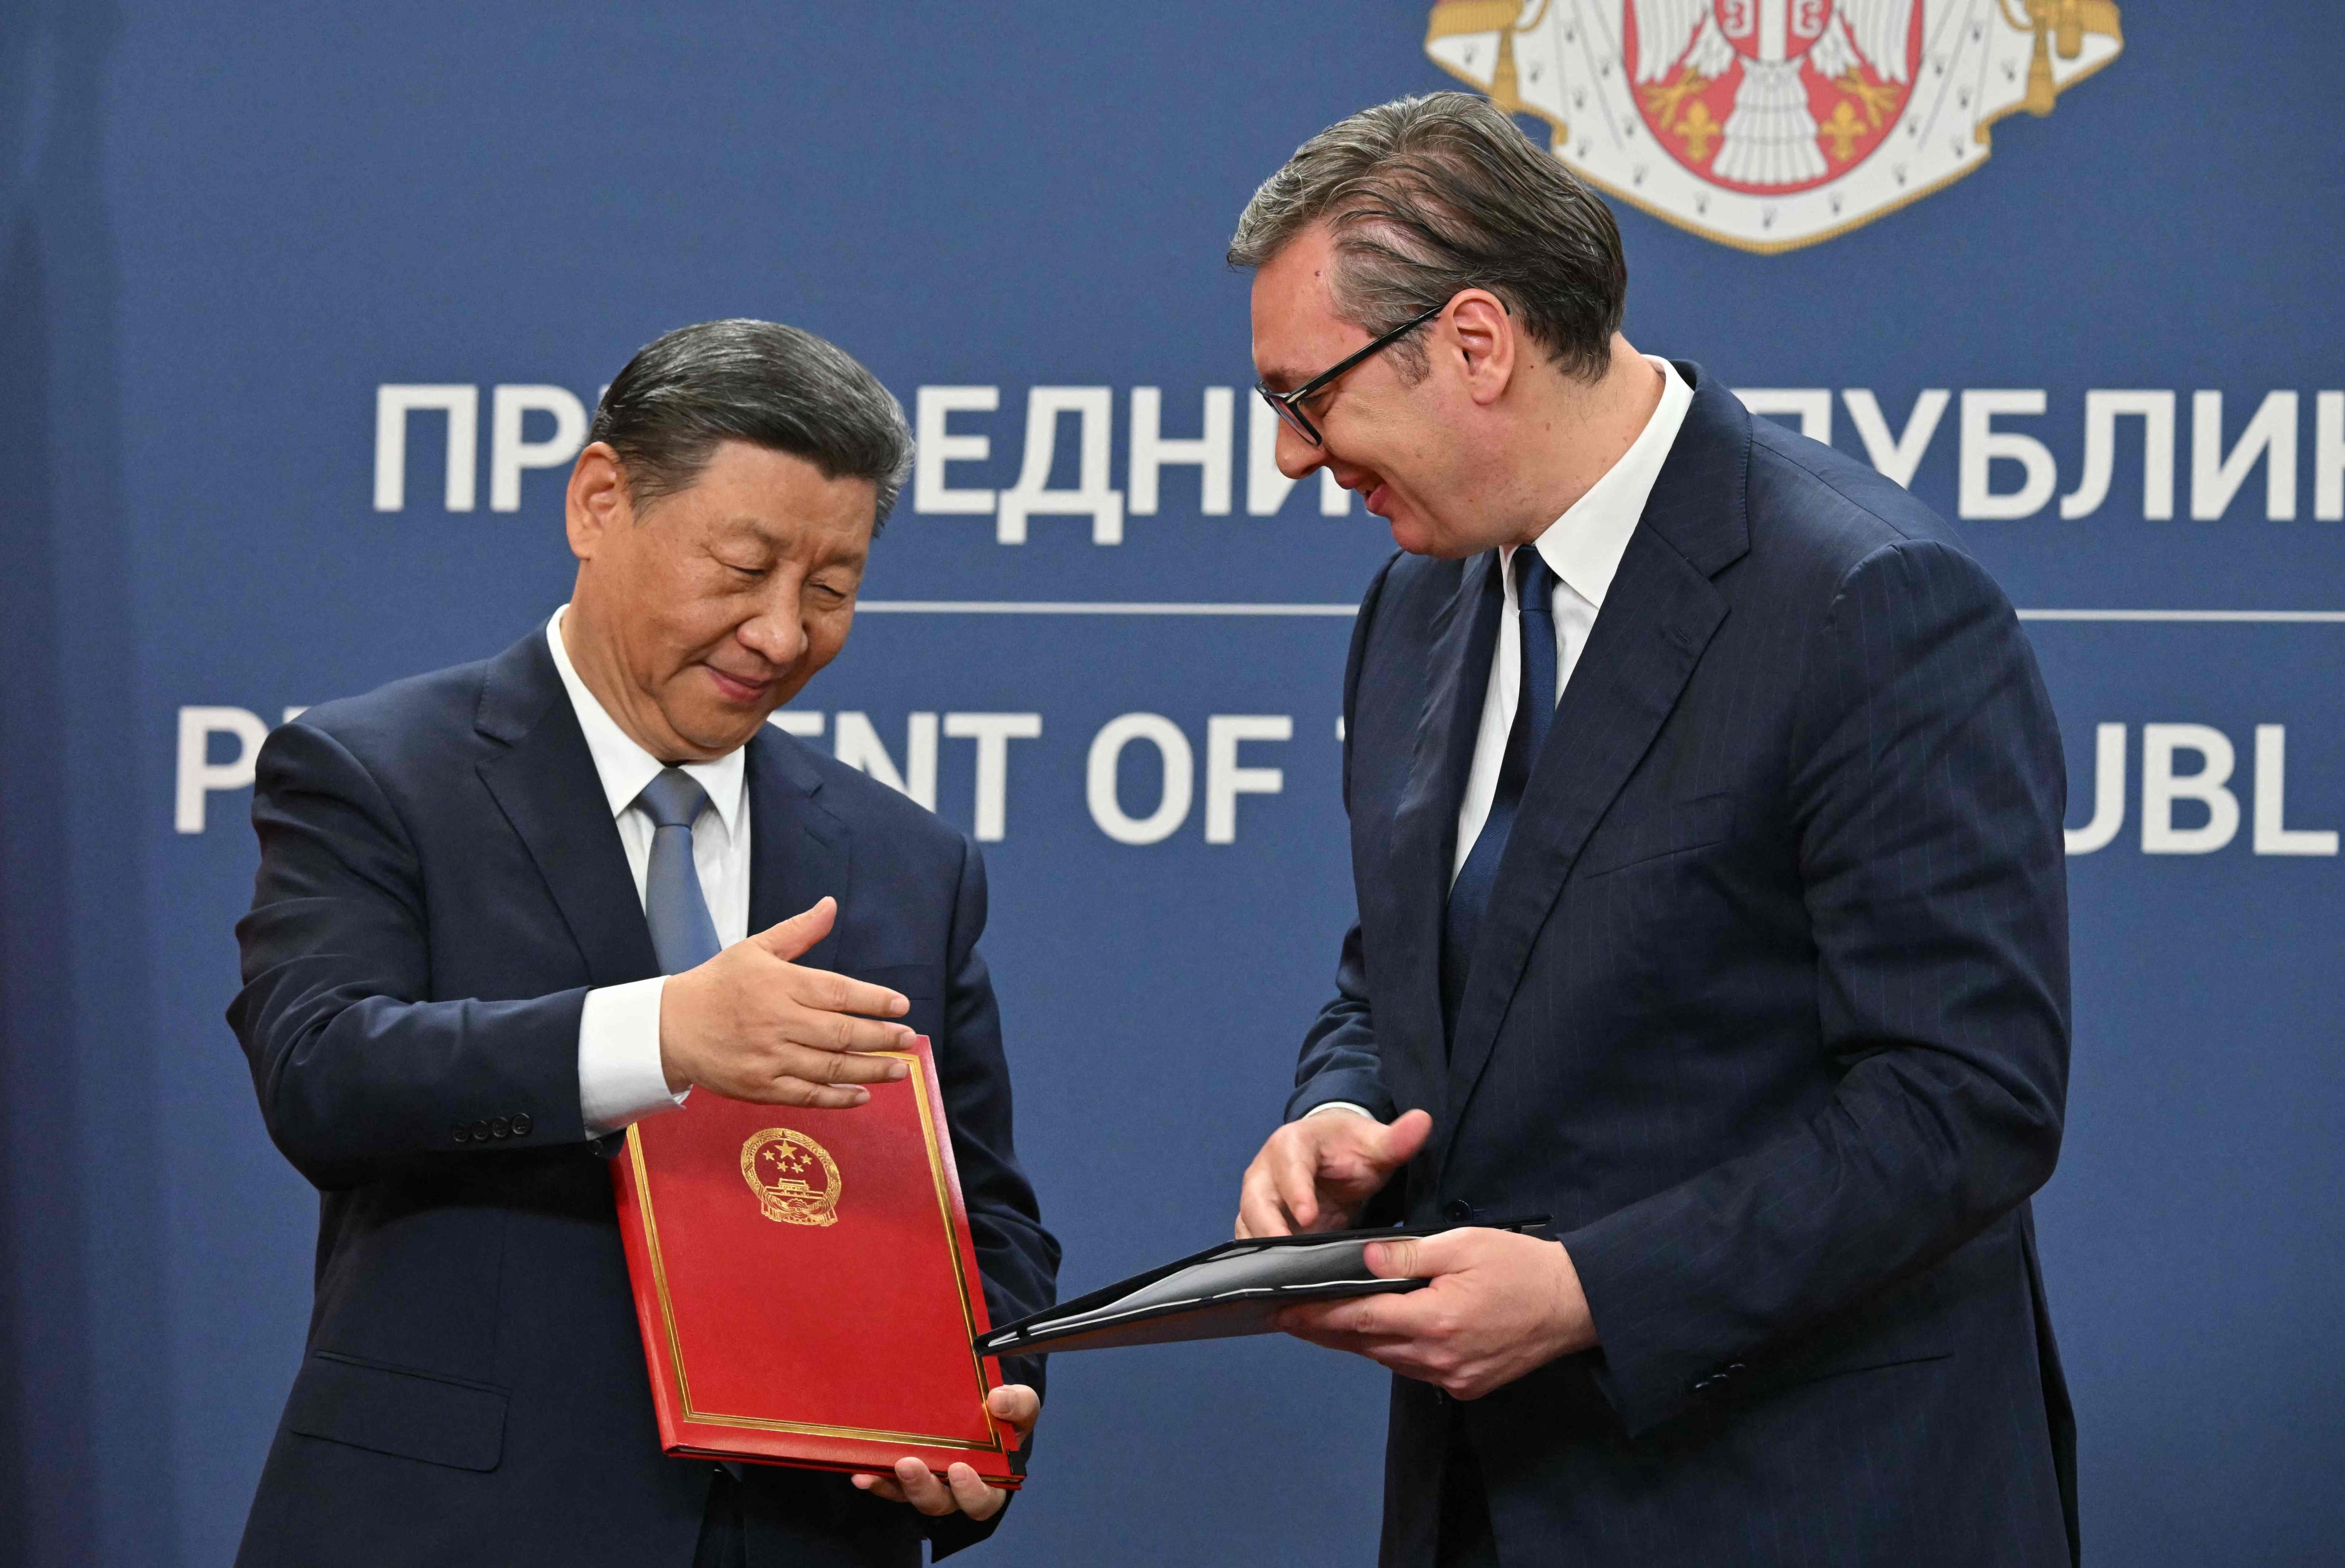 Chinese President Xi Jinping (left) and Serbian President Aleksandar Vucic prepare to shake hands after signing bilateral documents during a meeting in Belgrade, on Wednesday, as Beijing sought to deepen political and economic ties with friendlier countries in Europe. Photo: AFP